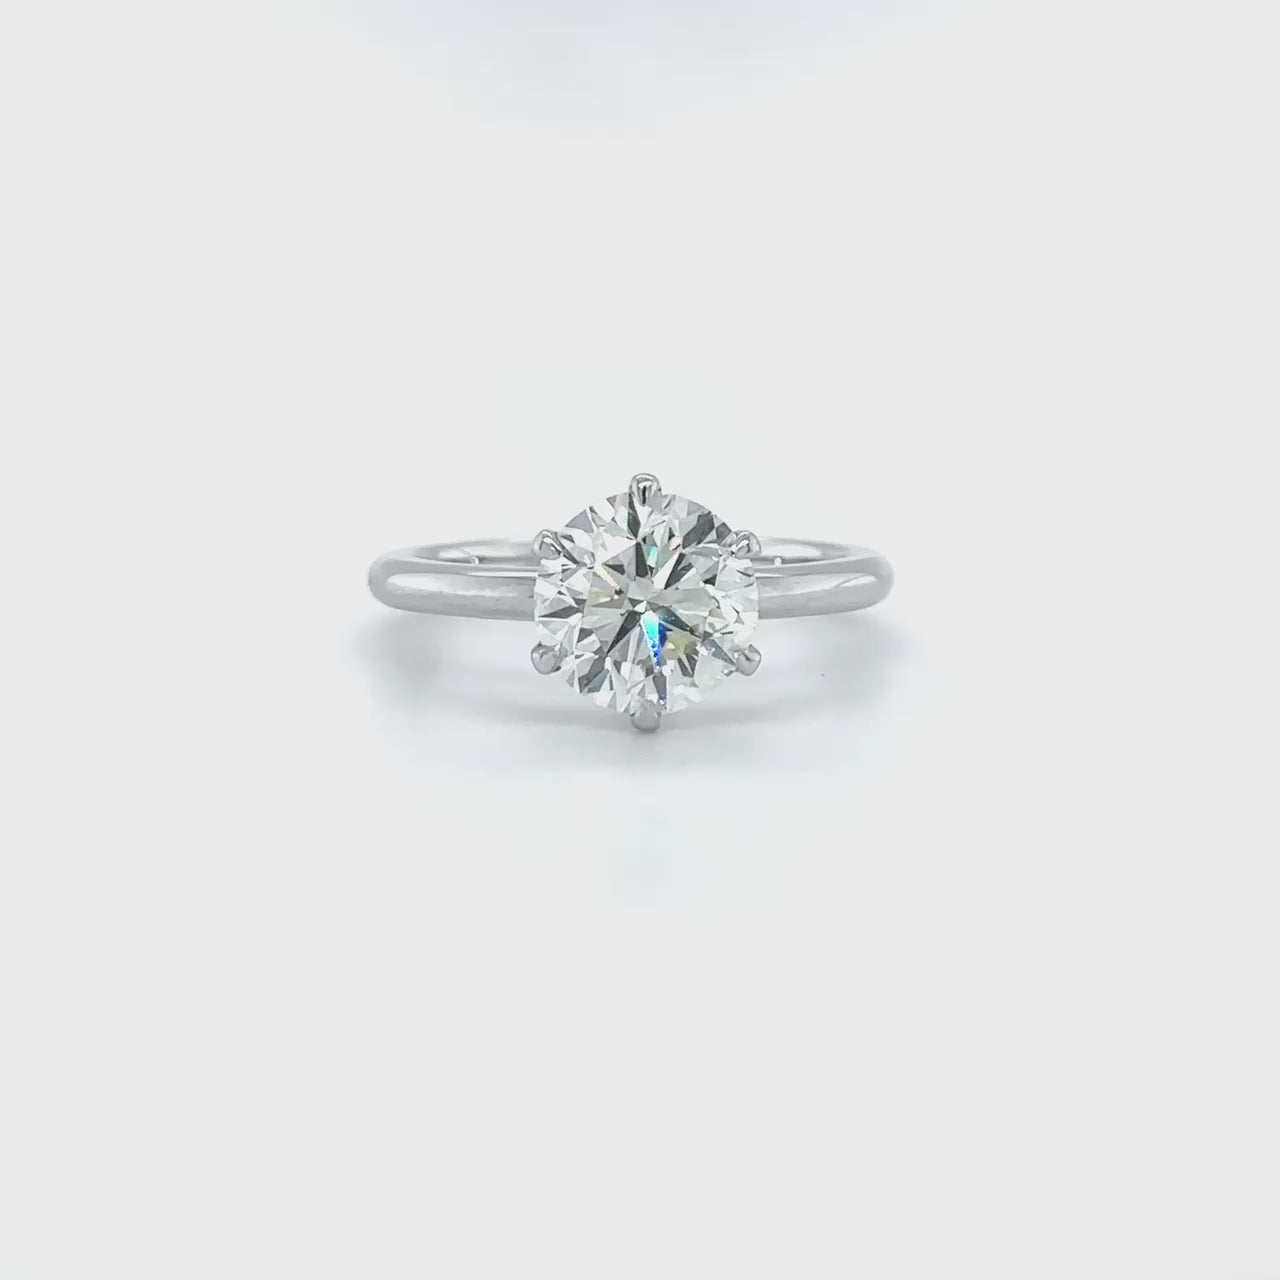 A, round, brilliant, solitaire, diamond, ring, with, a, sparkling, center, stone, set, in, a, prong, setting, on, a, polished, metal, band.